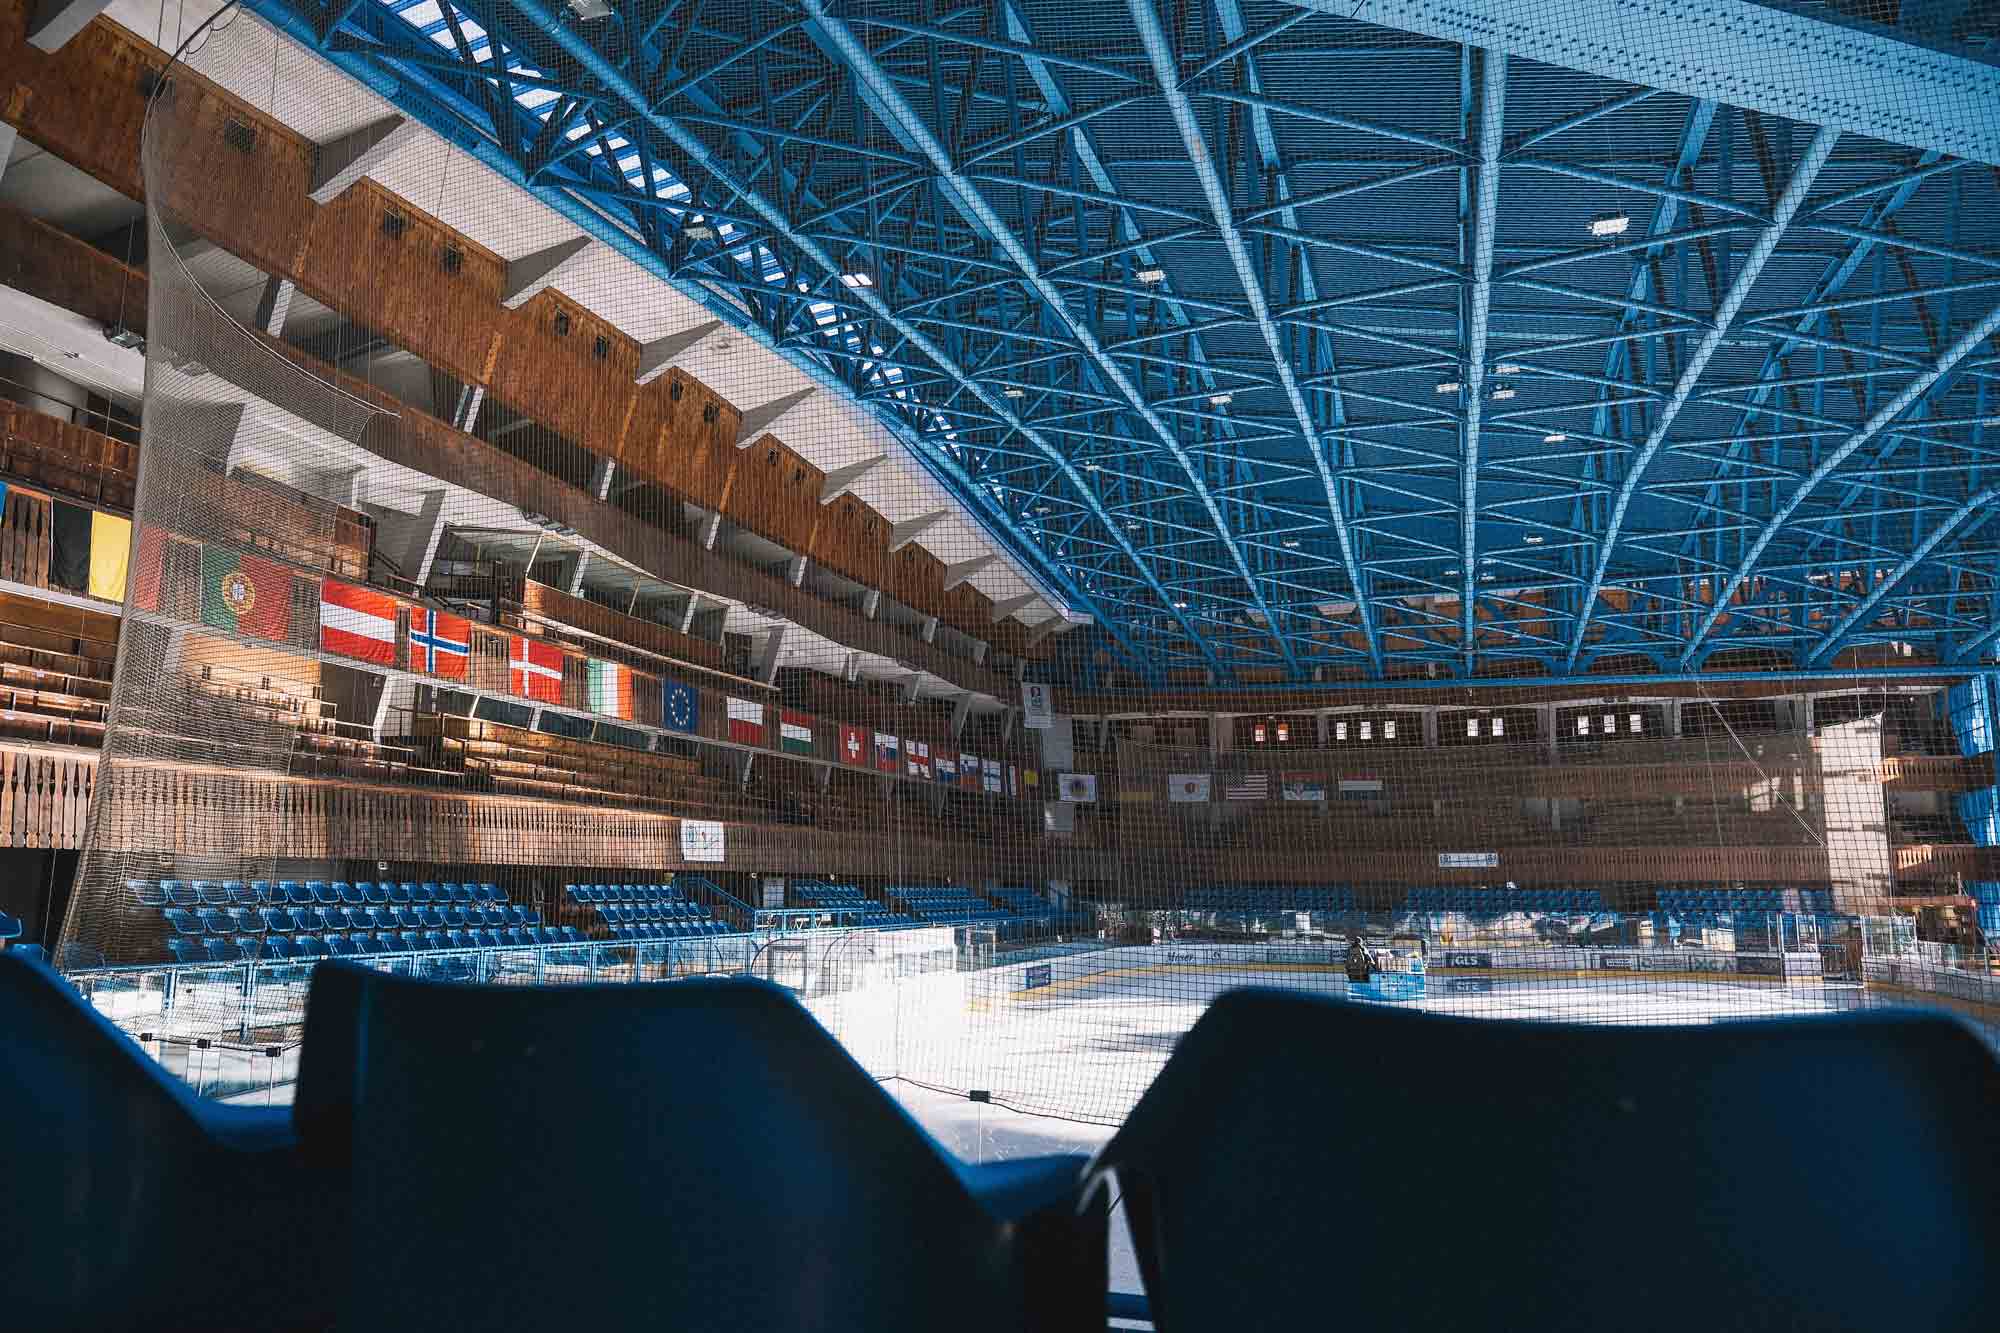 Interior view of the Curling Olympic Stadium in Cortina